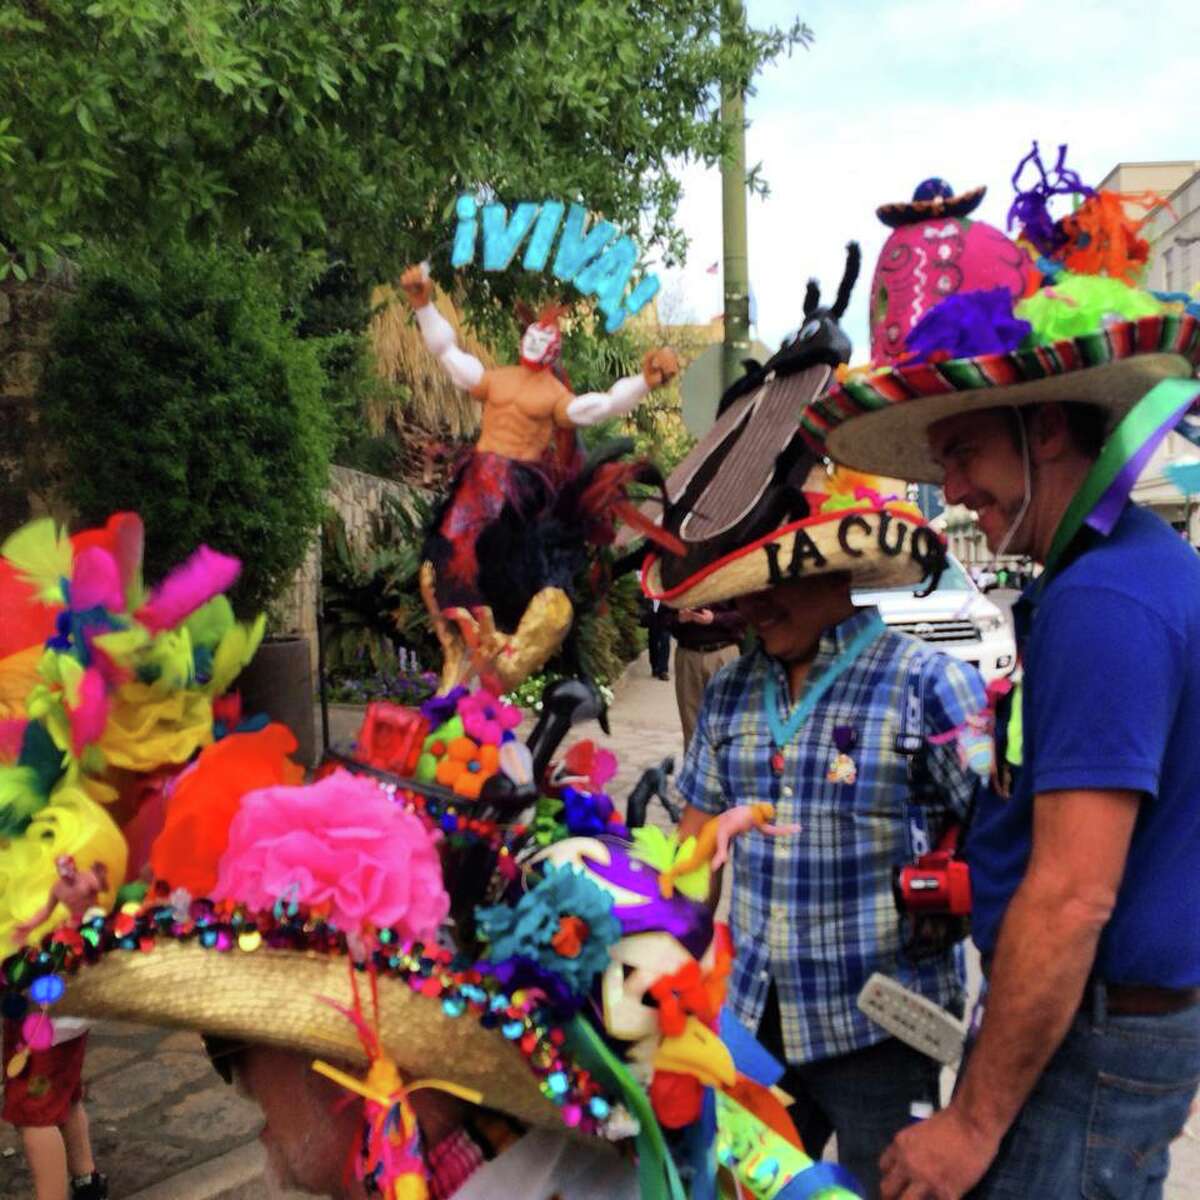 Big hat wearers like David L. Durbin (crouched) and his buddies were hounded by the paparazzi at Fiesta Fiesta.